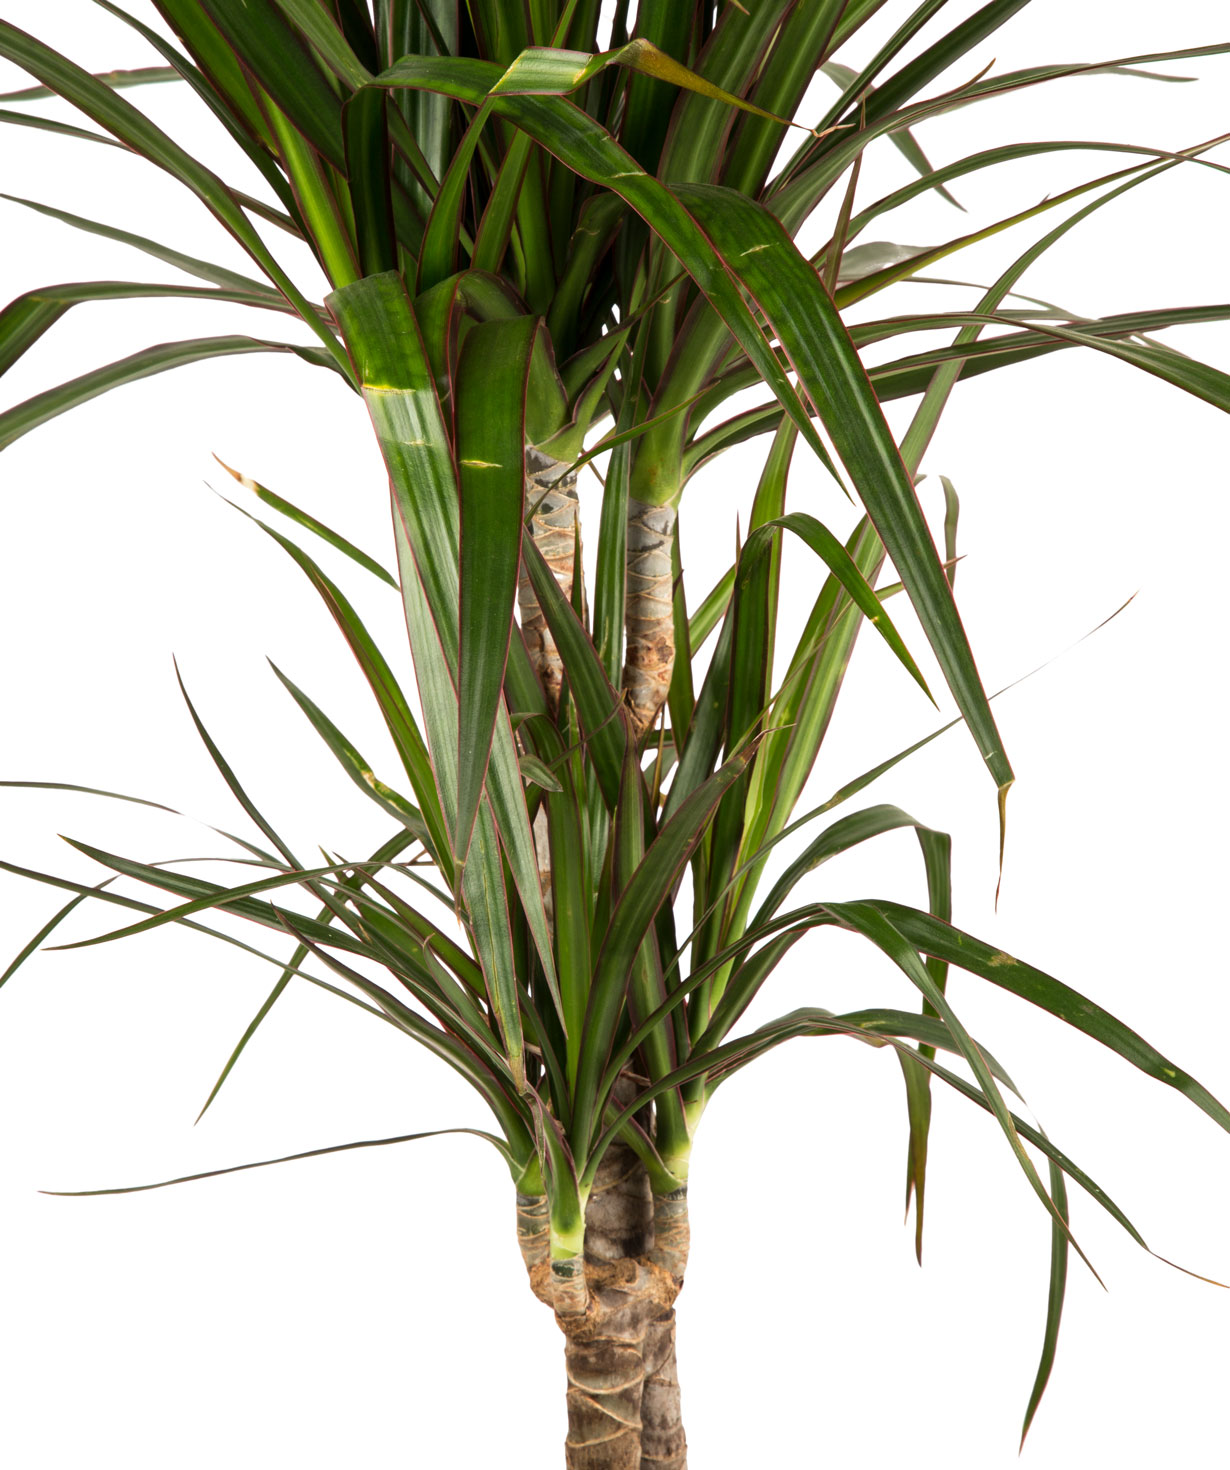 Plant `Orchid Gallery` Dracaena №1